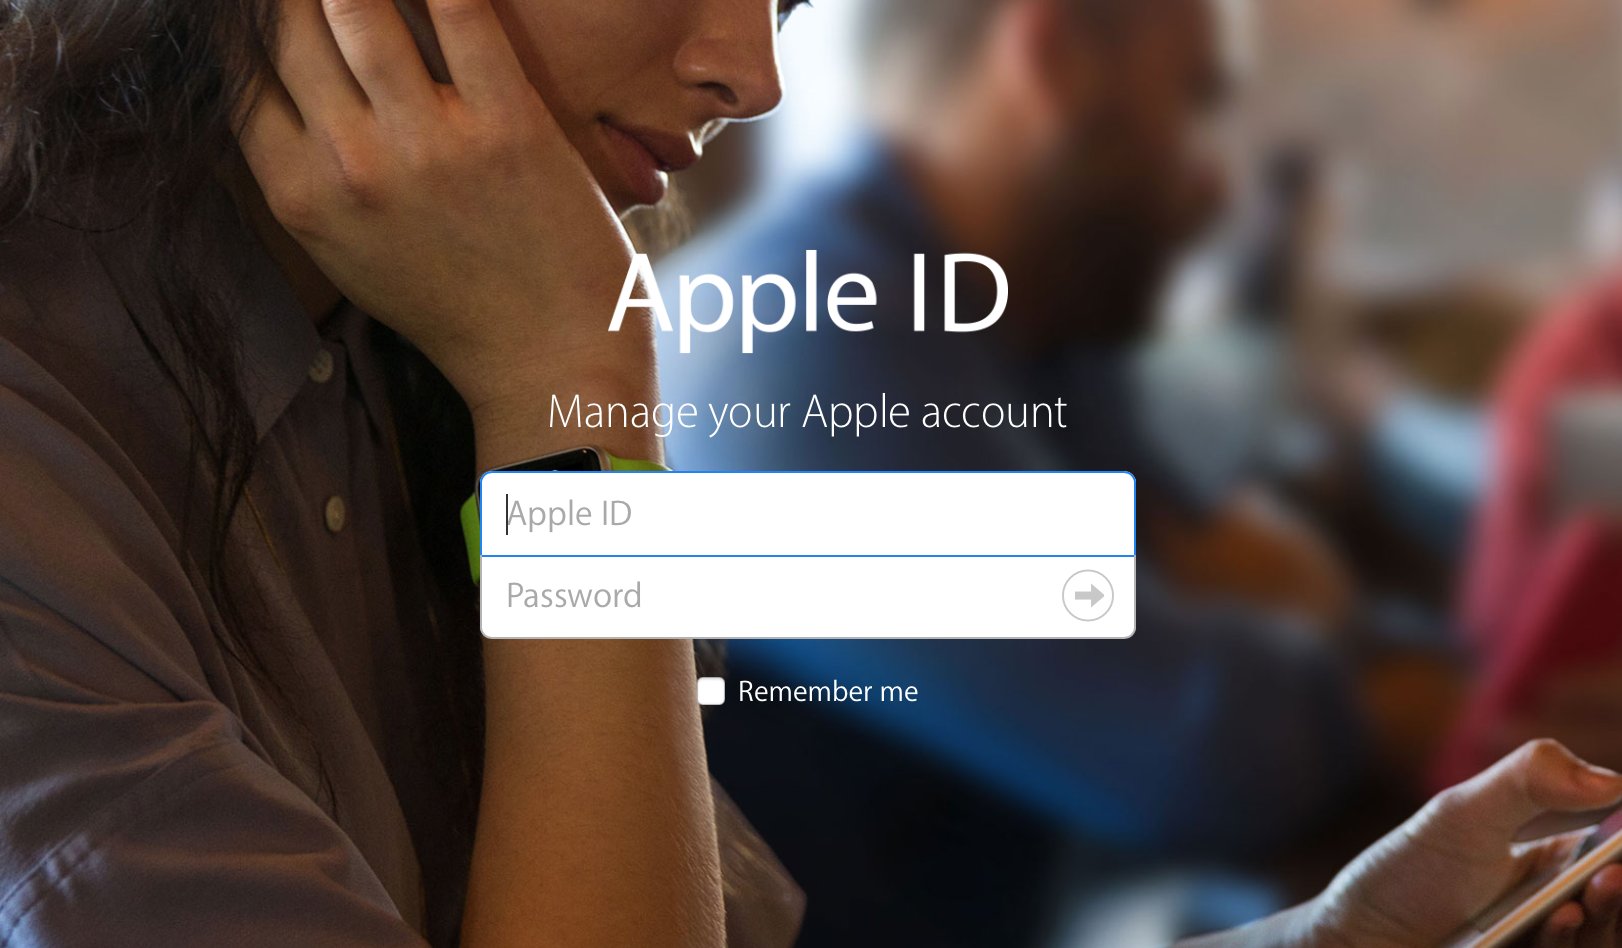 apple-id-has-been-locked-for-security-reasons-2022